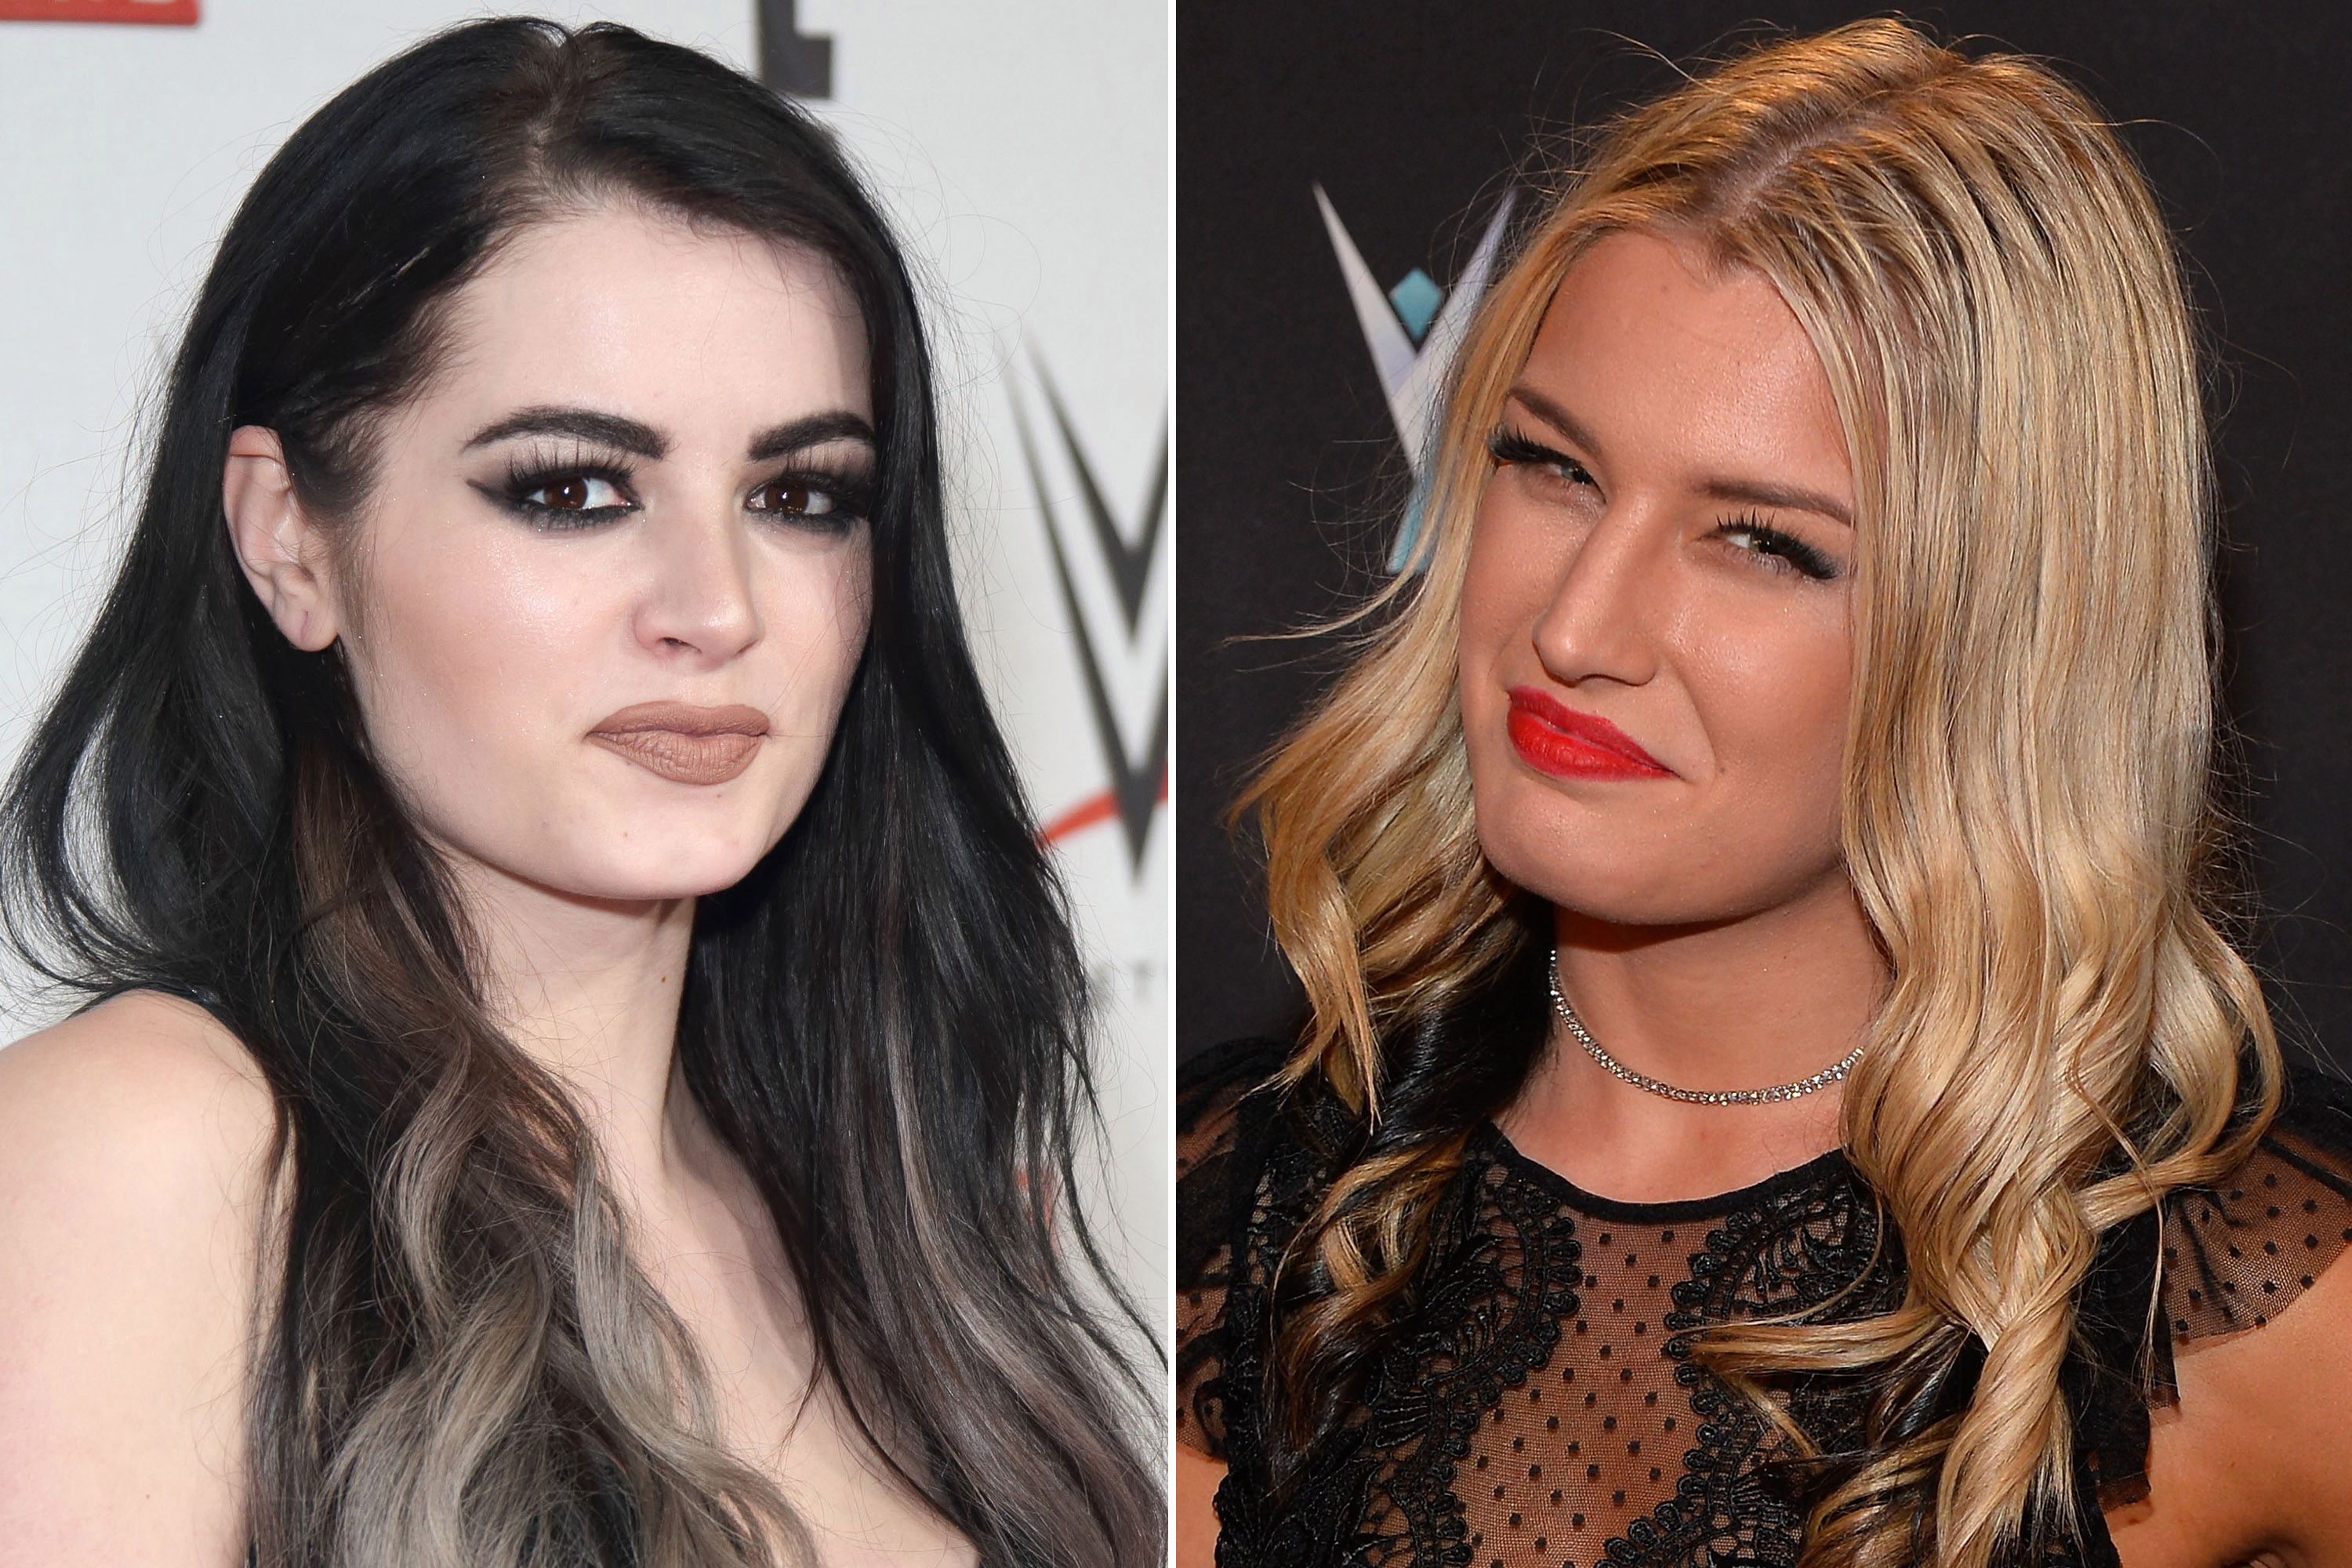 WWE star Paige gives Toni Storm support after nude photo leak